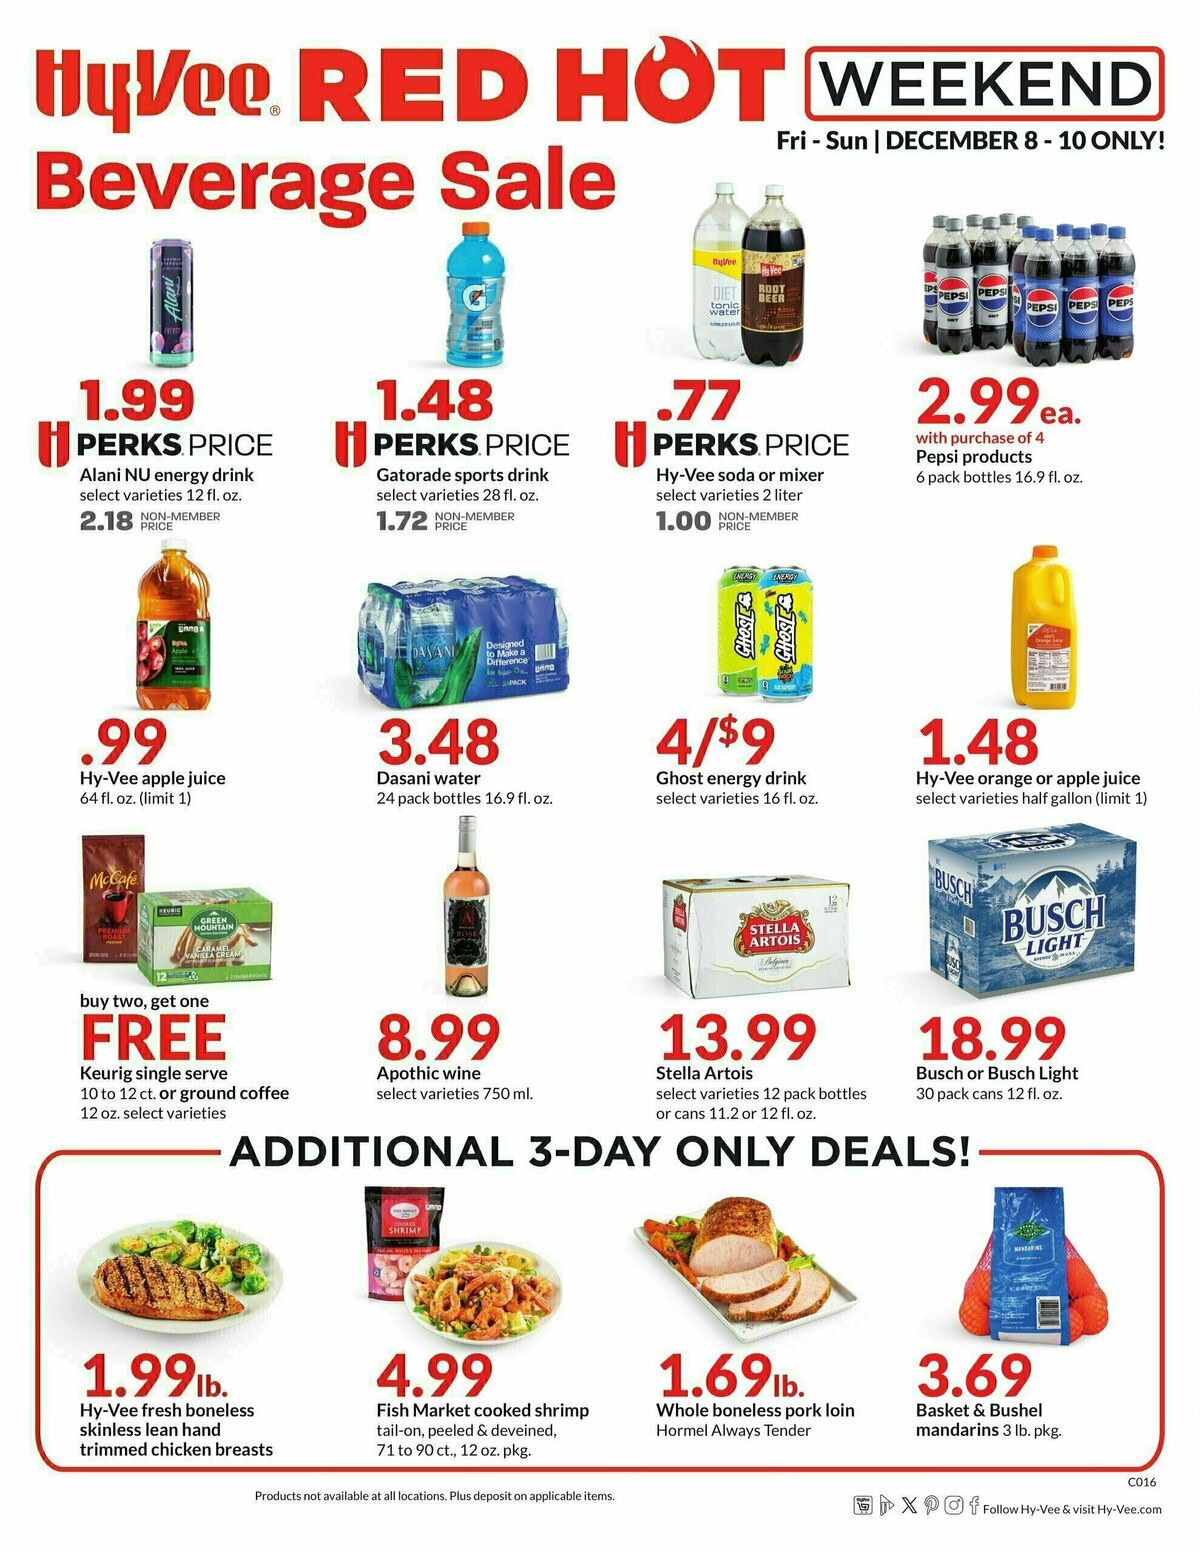 HyVee Red Hot Weekend Deals & Ads from December 8